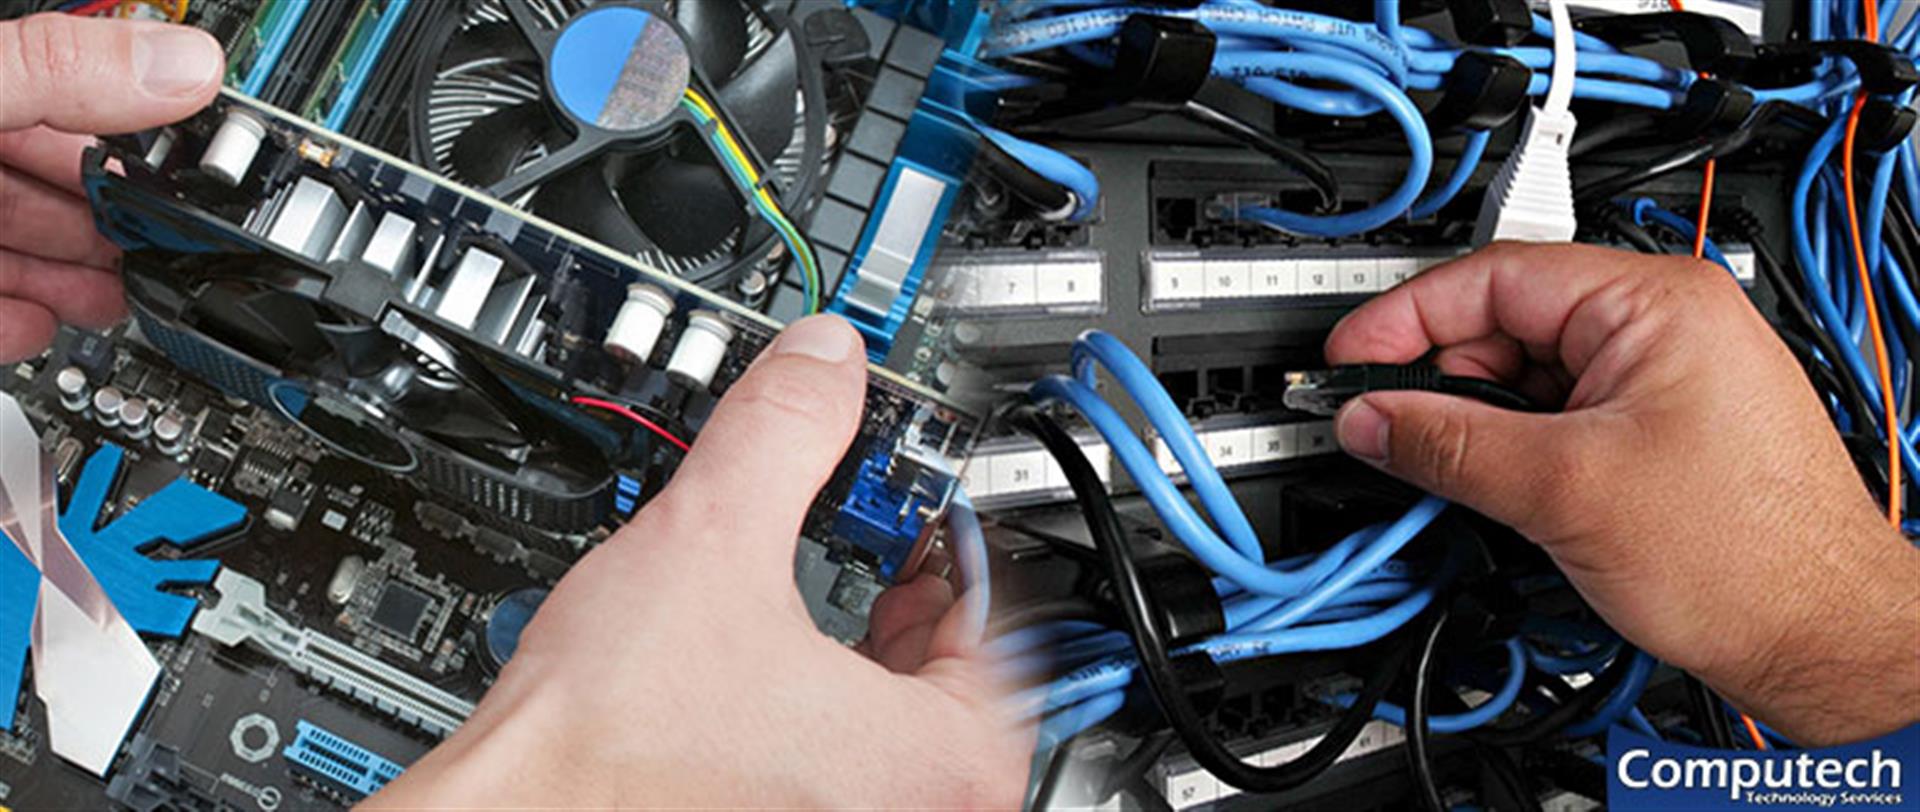 South Fulton Tennessee On-Site PC and Printer Repair, Networks, Voice & Data Cabling Services